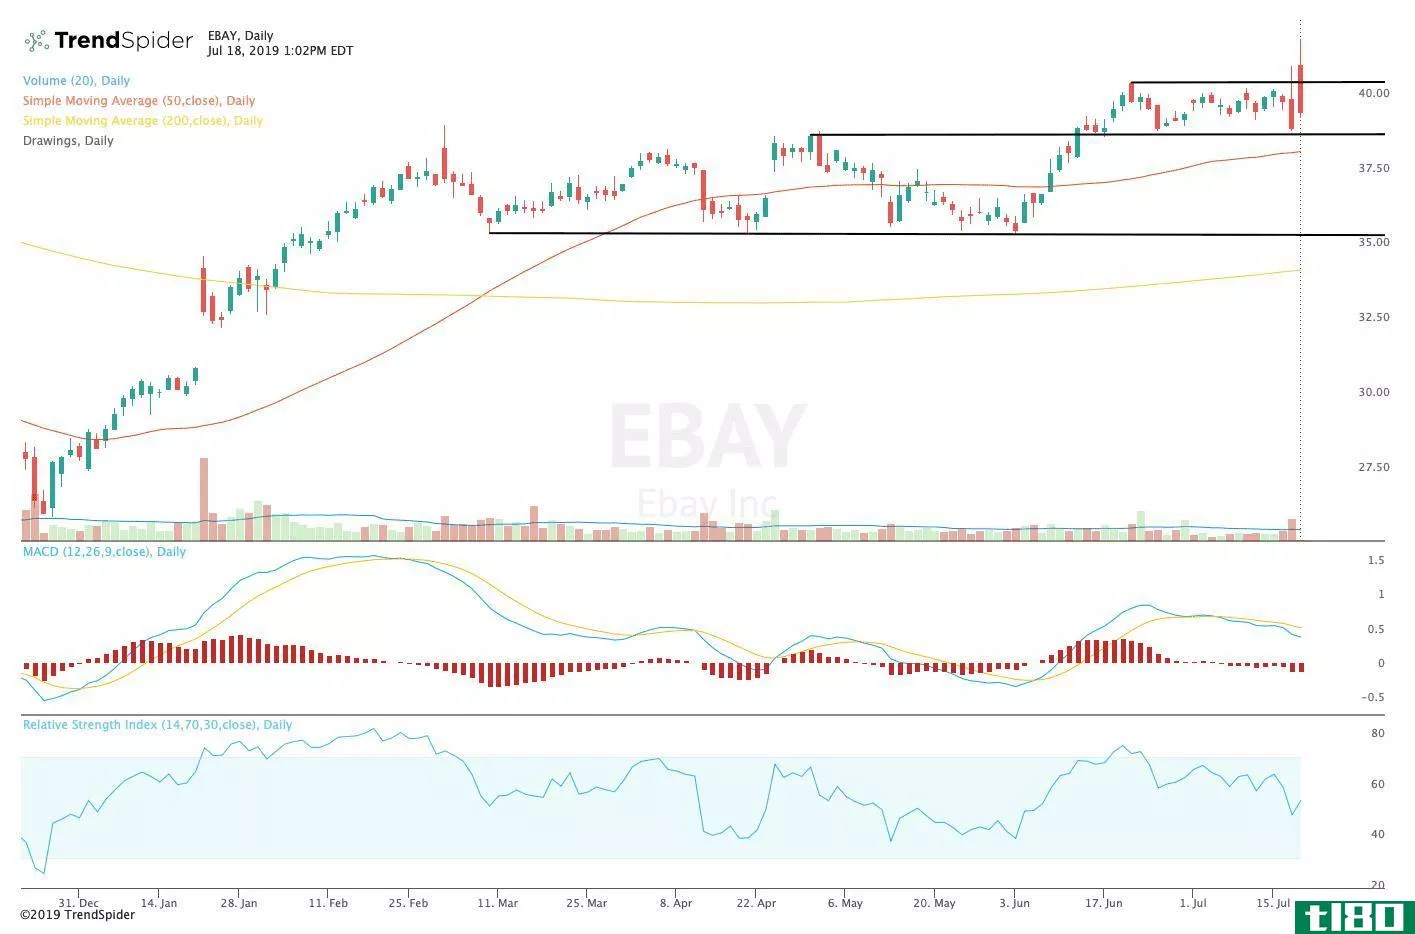 Chart showing the share price performance of eBay Inc. (EBAY)